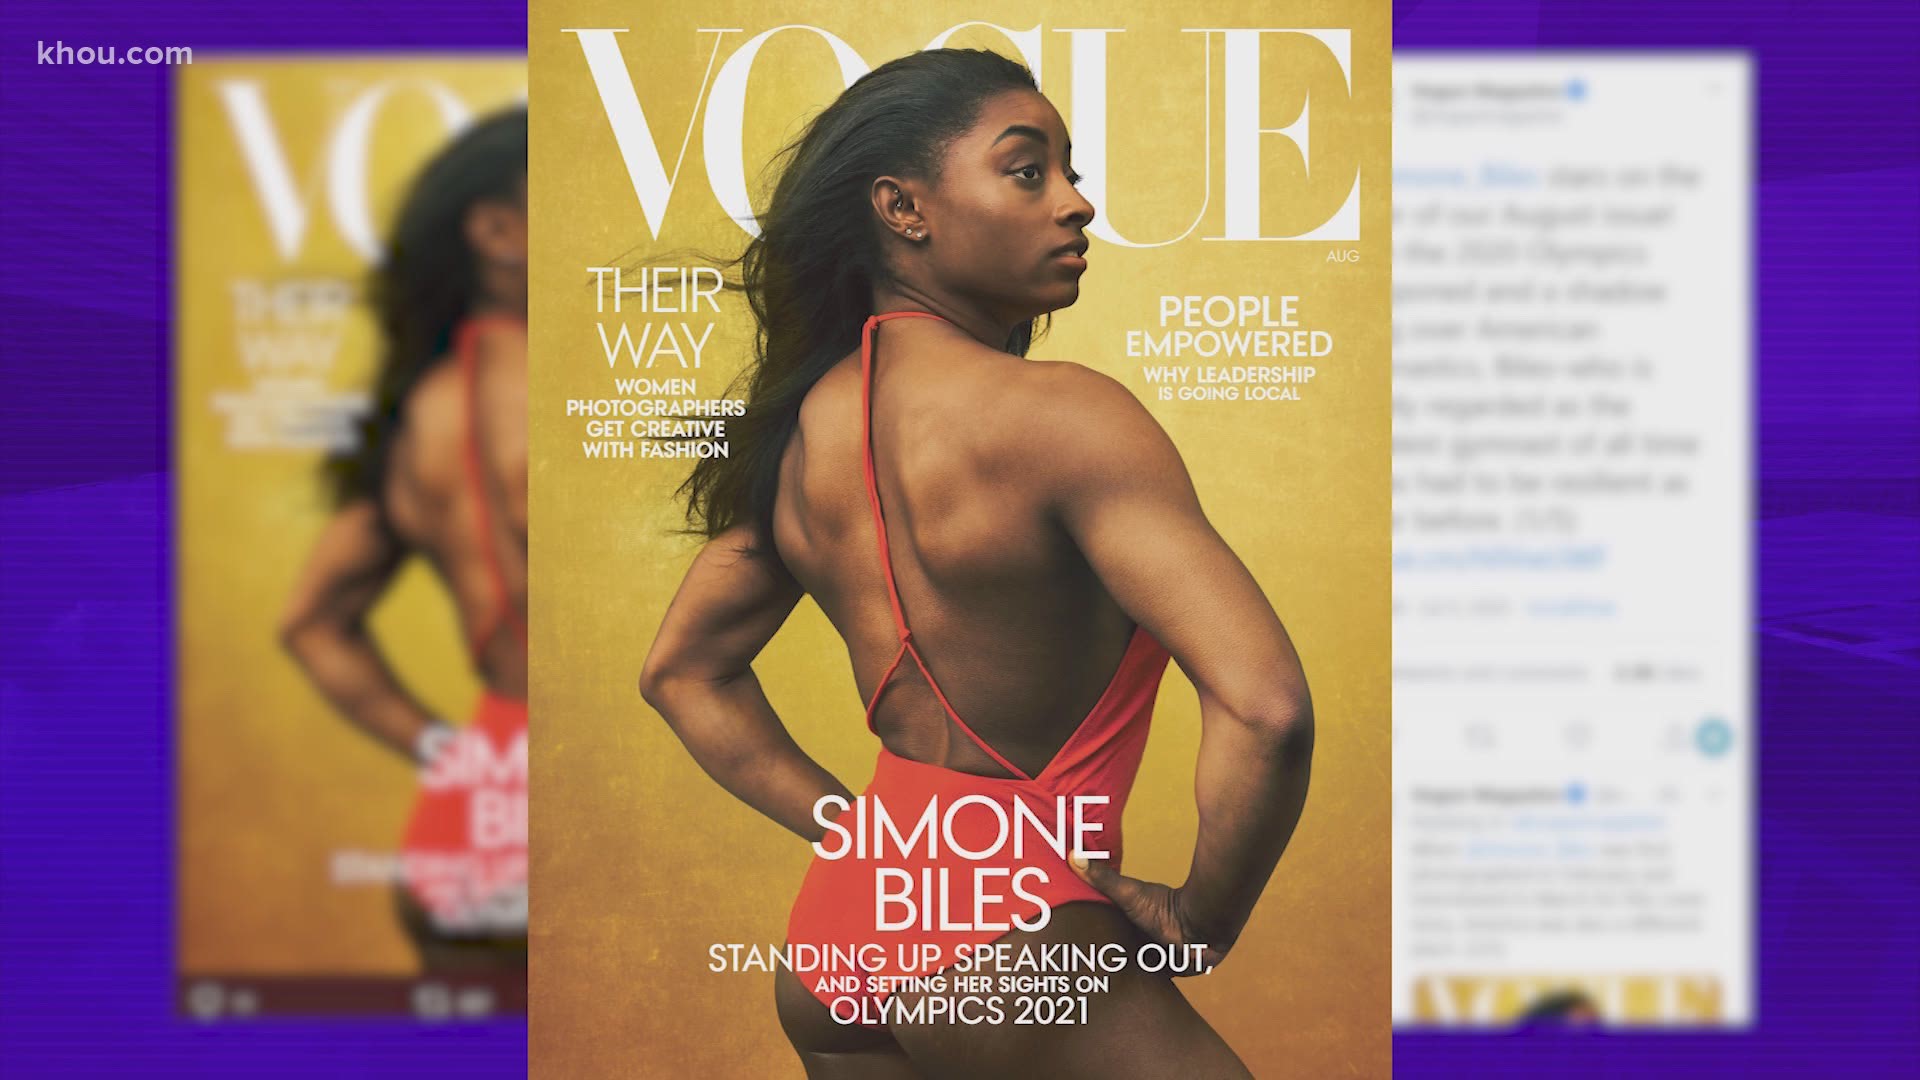 Spring native and Olympic gold medal-winning gymnast Simone Biles graces the August issue of Vogue.